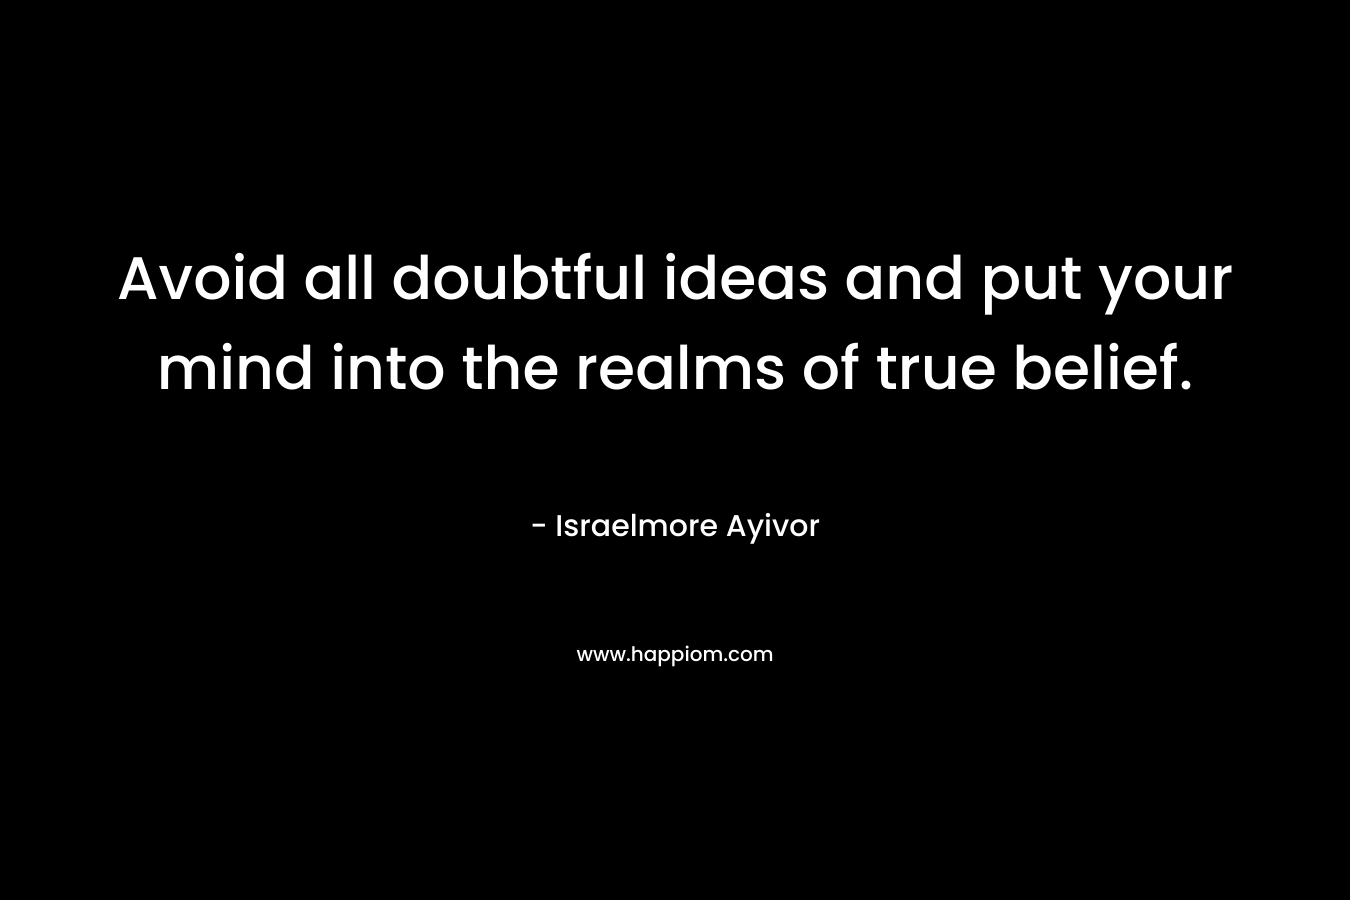 Avoid all doubtful ideas and put your mind into the realms of true belief. – Israelmore Ayivor